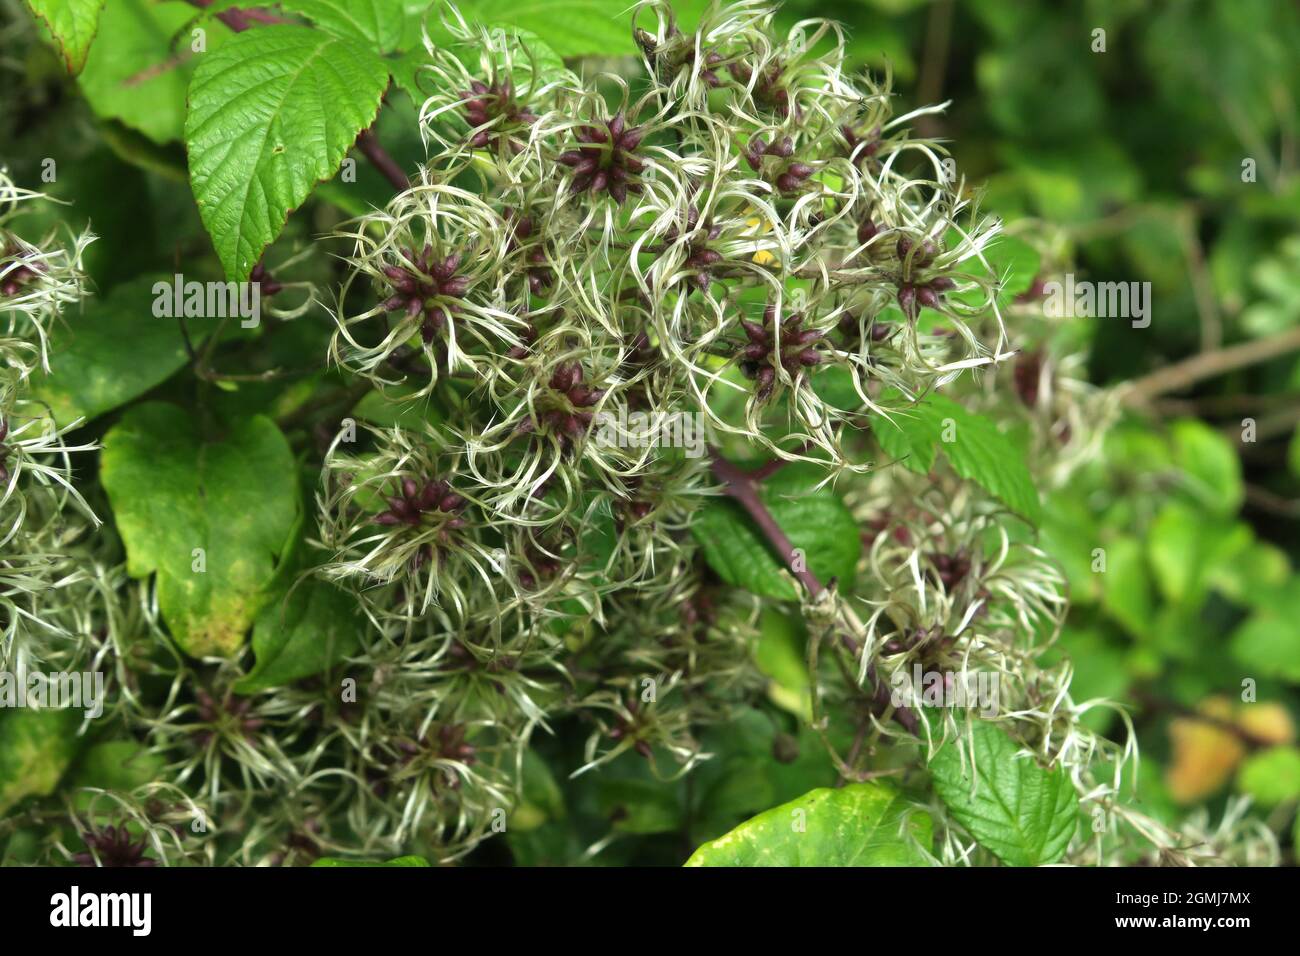 Clematis seed heads Stock Photo